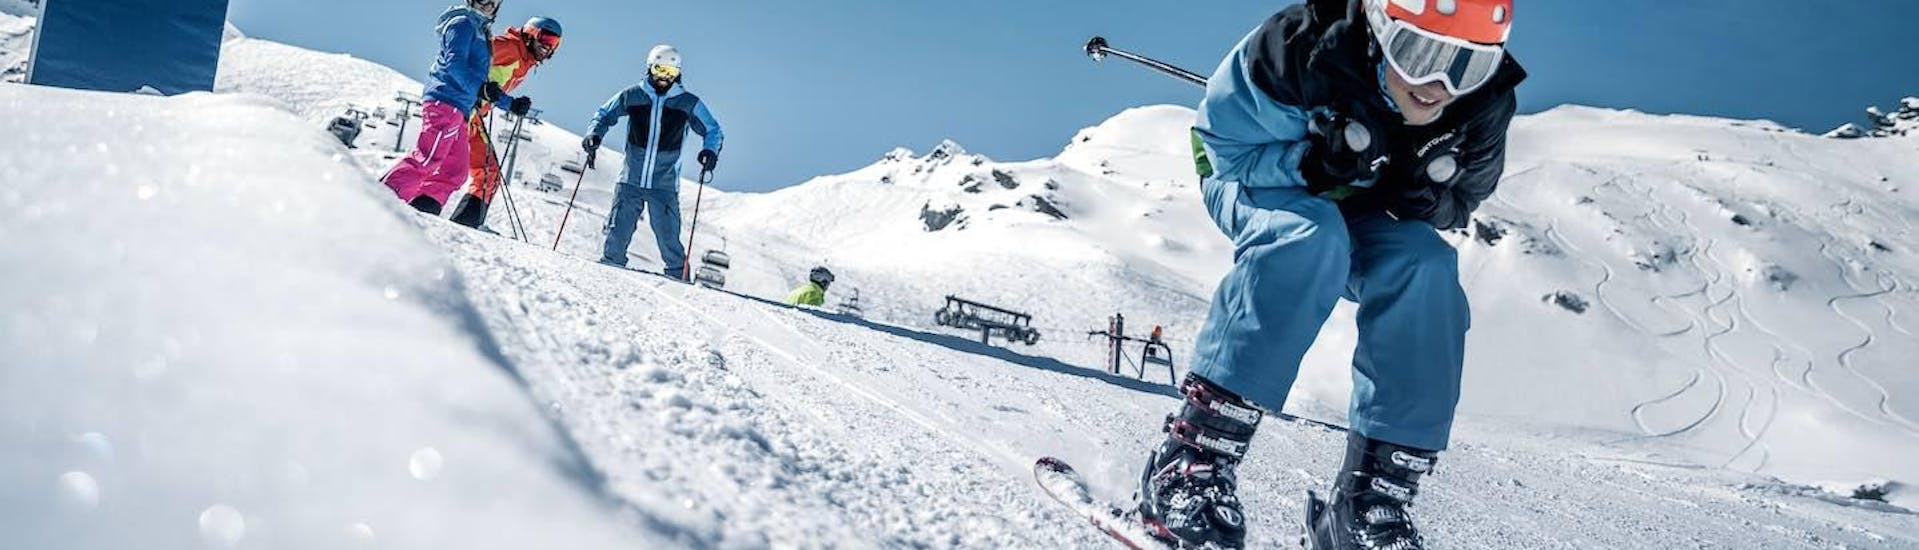 Teen Ski Lessons (12-15 y.) for All Levels.